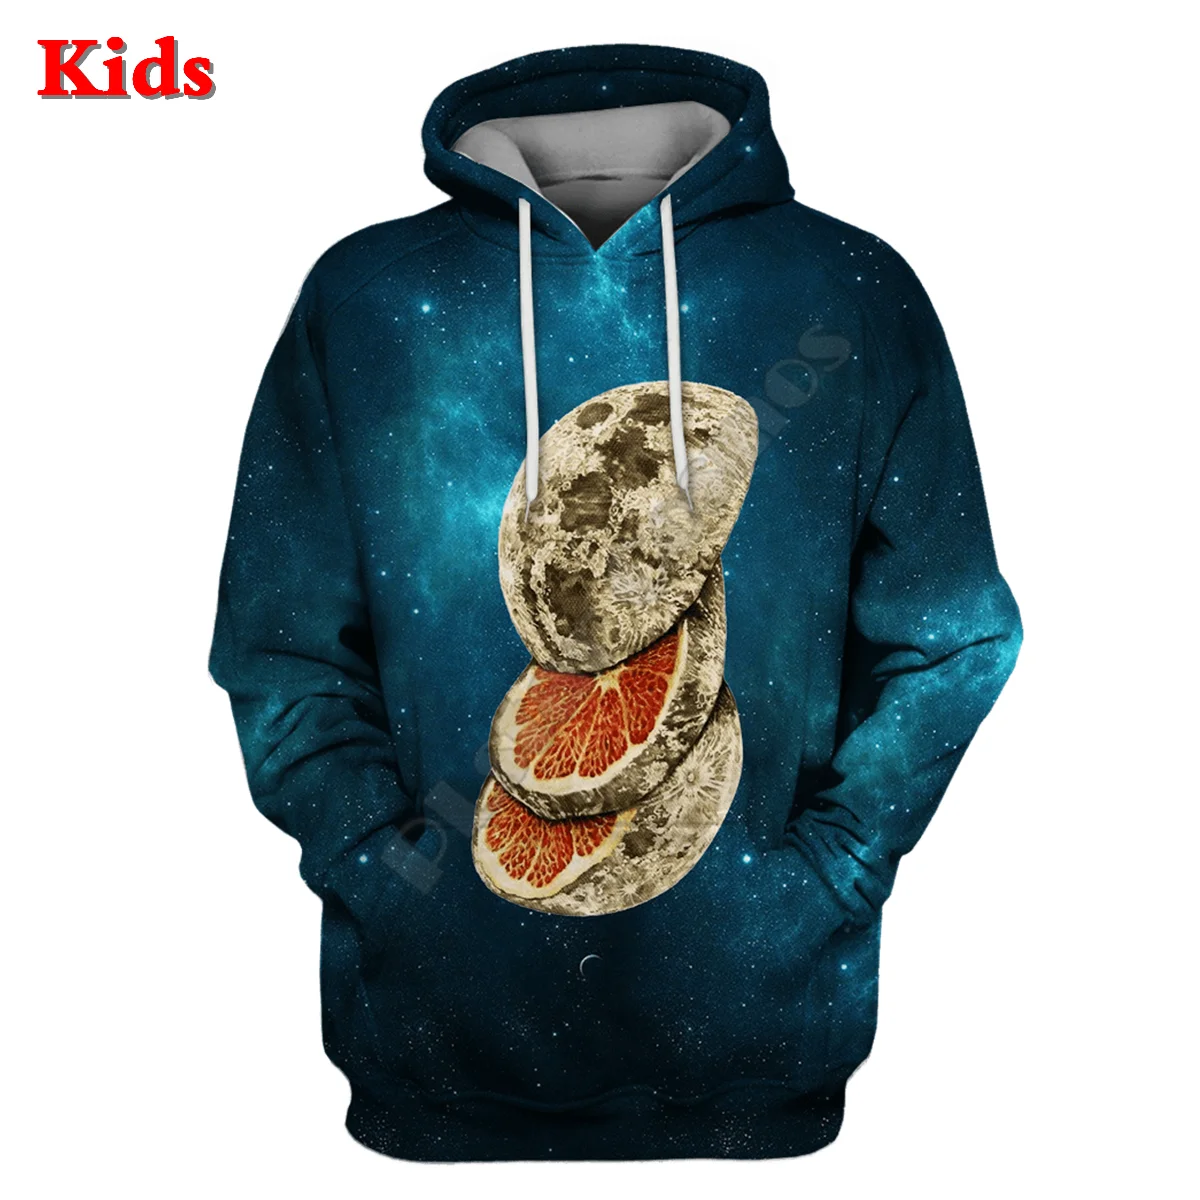 

The Moon in the Galaxy Background Hoodies T-shirt 3D Printed Kids Sweatshirt Long Sleeve Boy For Girl Funny Pullover 05